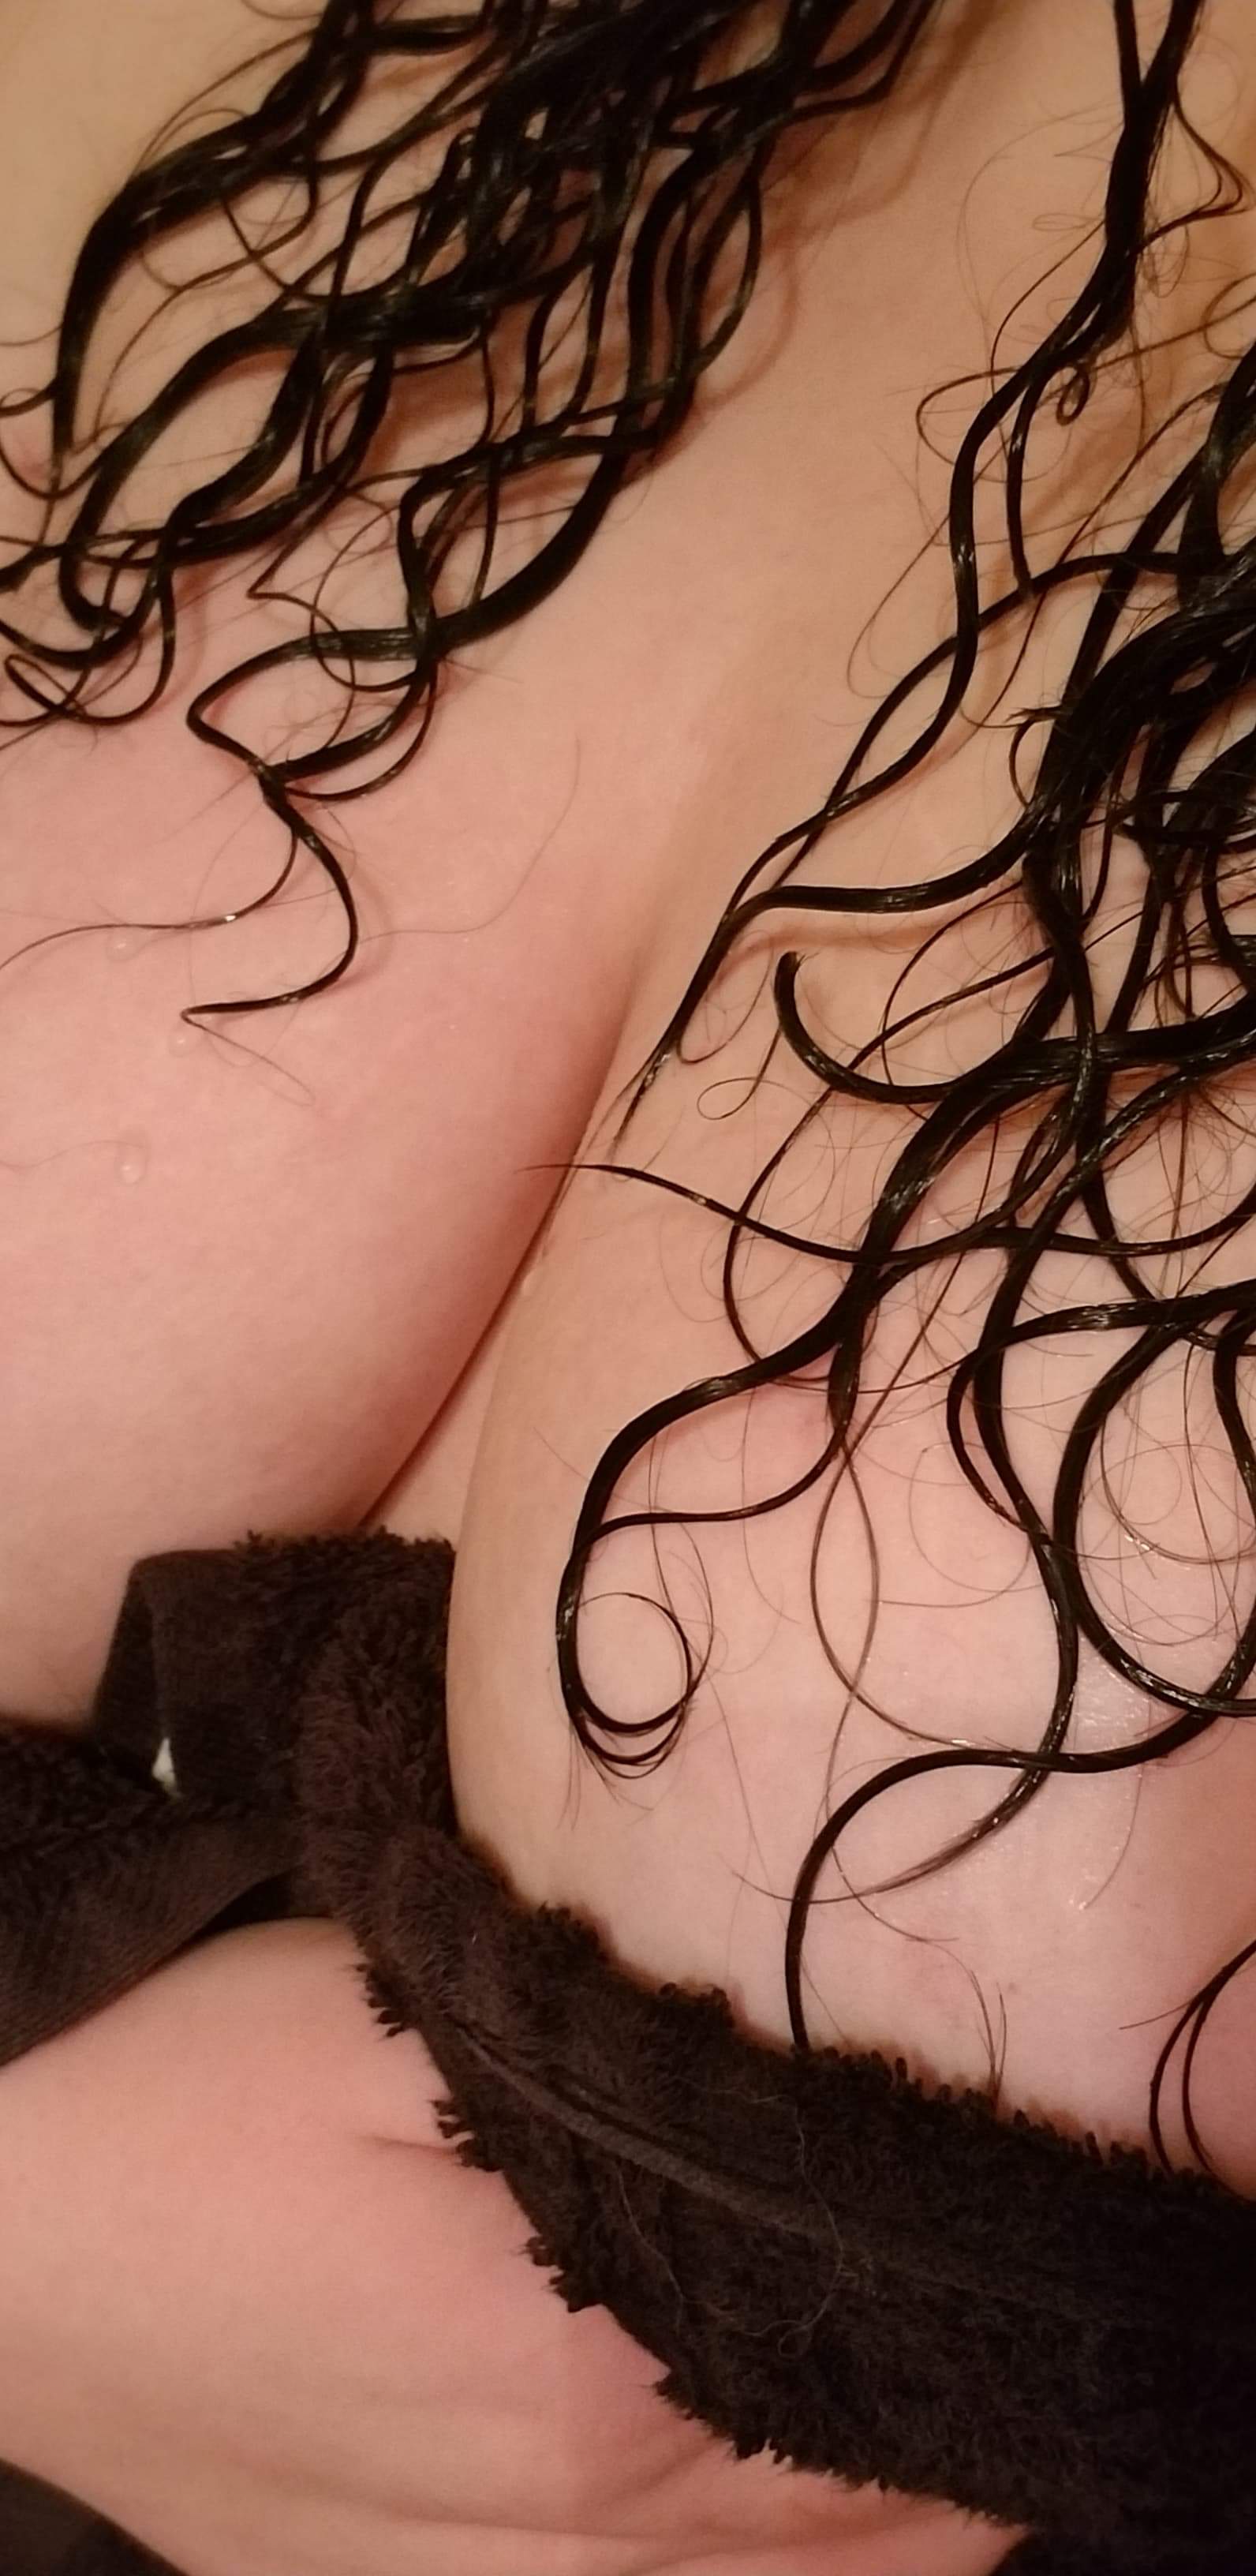 Hubby is still at work, I'm thinking I need some help drying off, any takers?